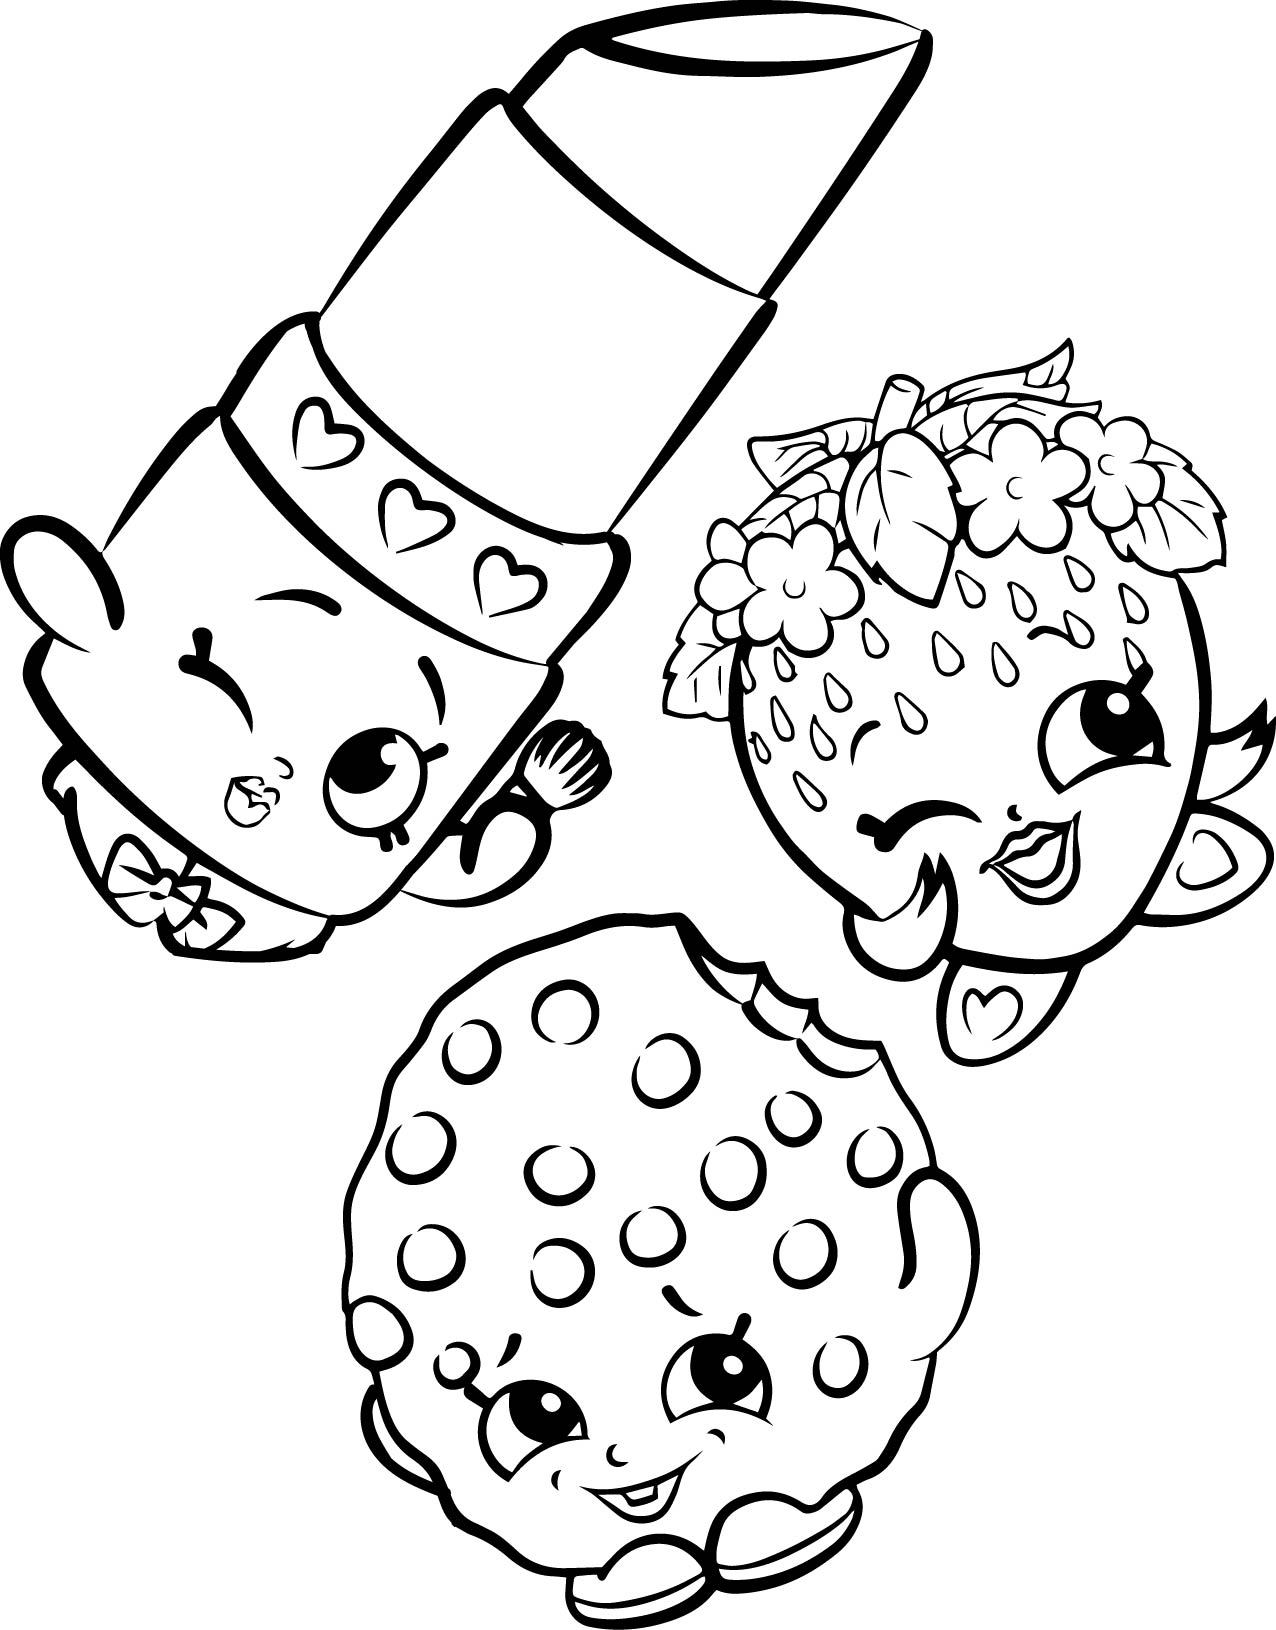 Shopkins Coloring Pages Best Coloring Pages For Kids Effy Moom Free Coloring Picture wallpaper give a chance to color on the wall without getting in trouble! Fill the walls of your home or office with stress-relieving [effymoom.blogspot.com]